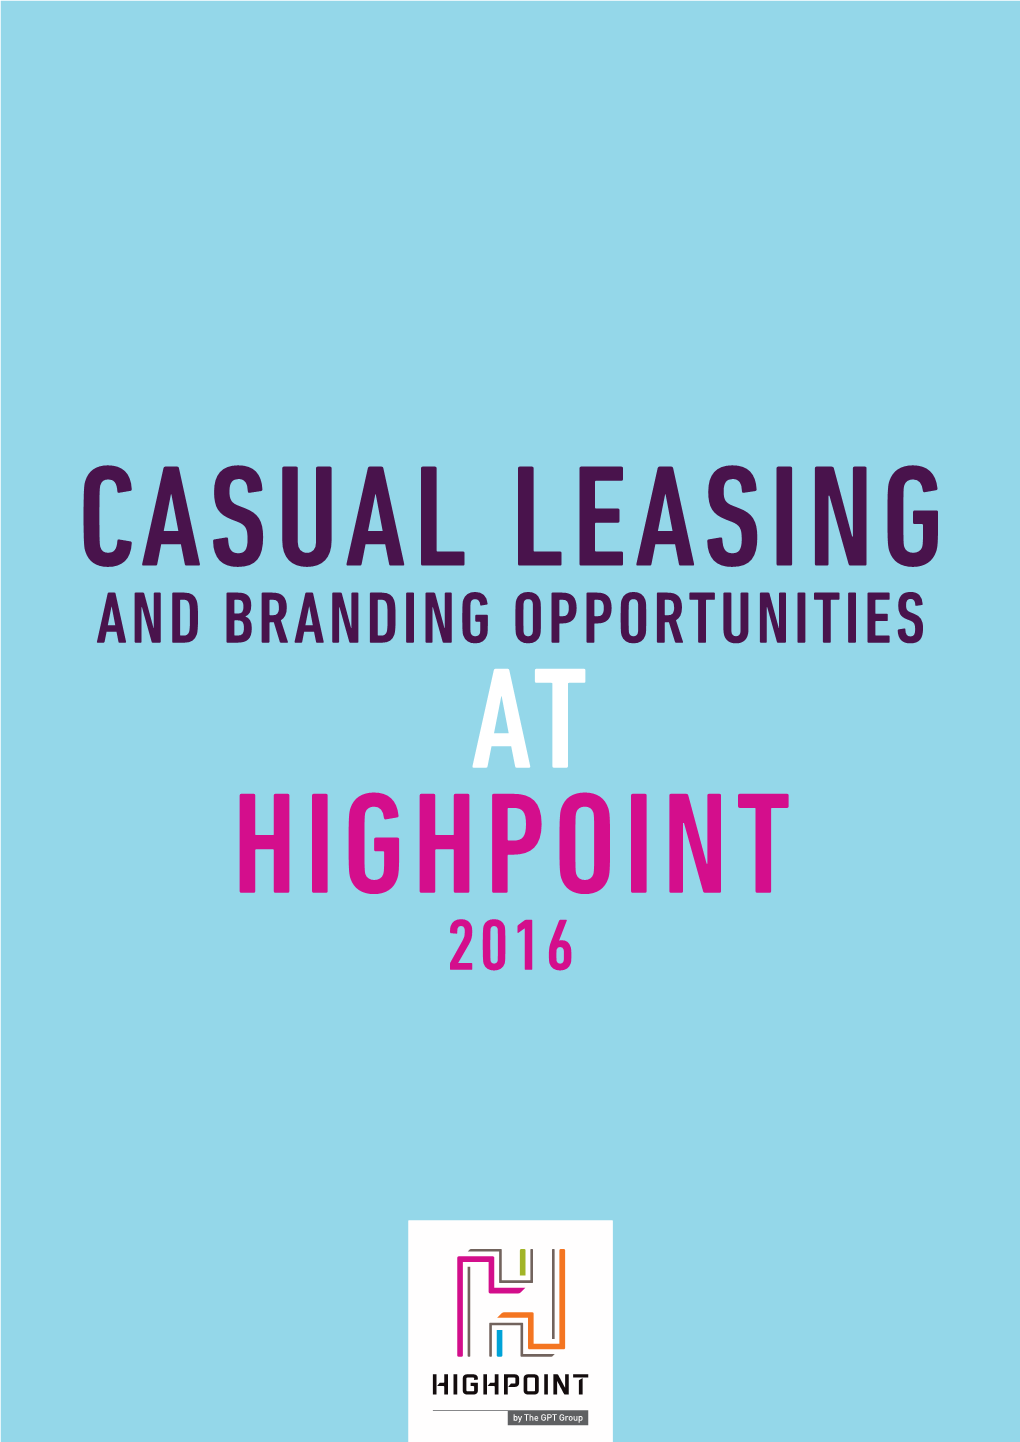 Casual Leasing and Branding Opportunities at Highpoint 2016 Intro to Highpoint